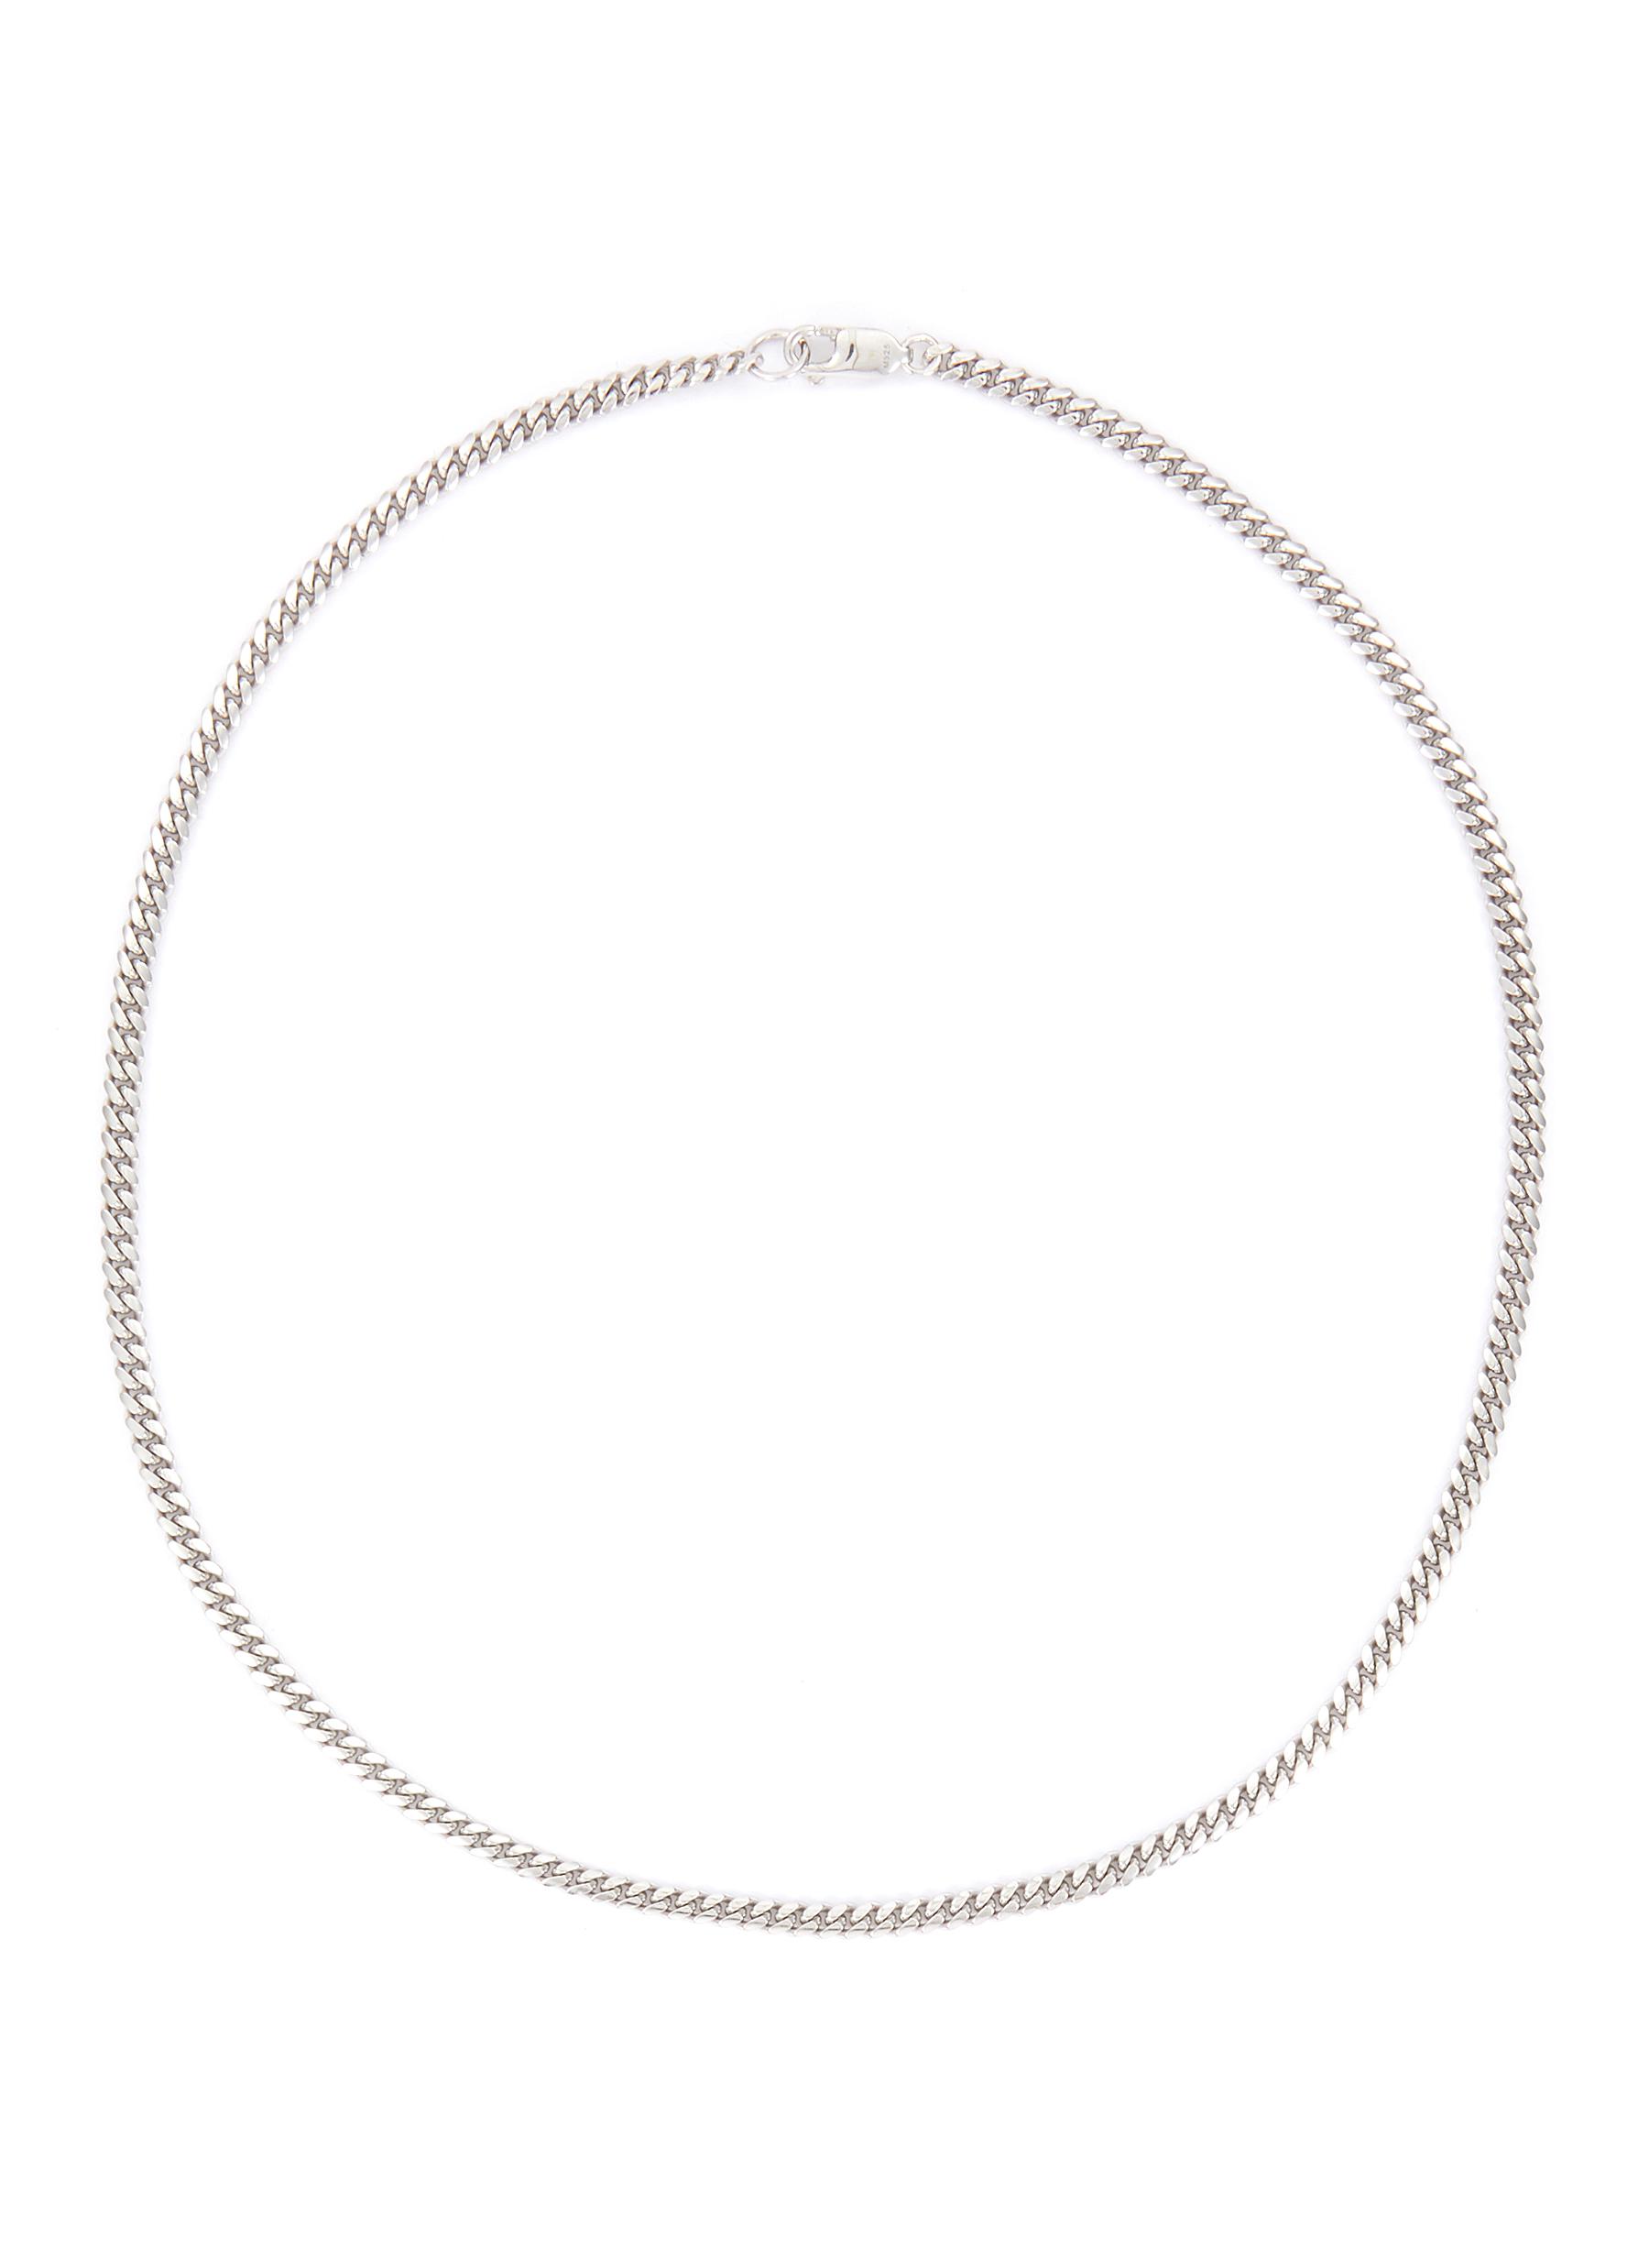 SILVER-TONED METAL ROUND CURB NECKLACE